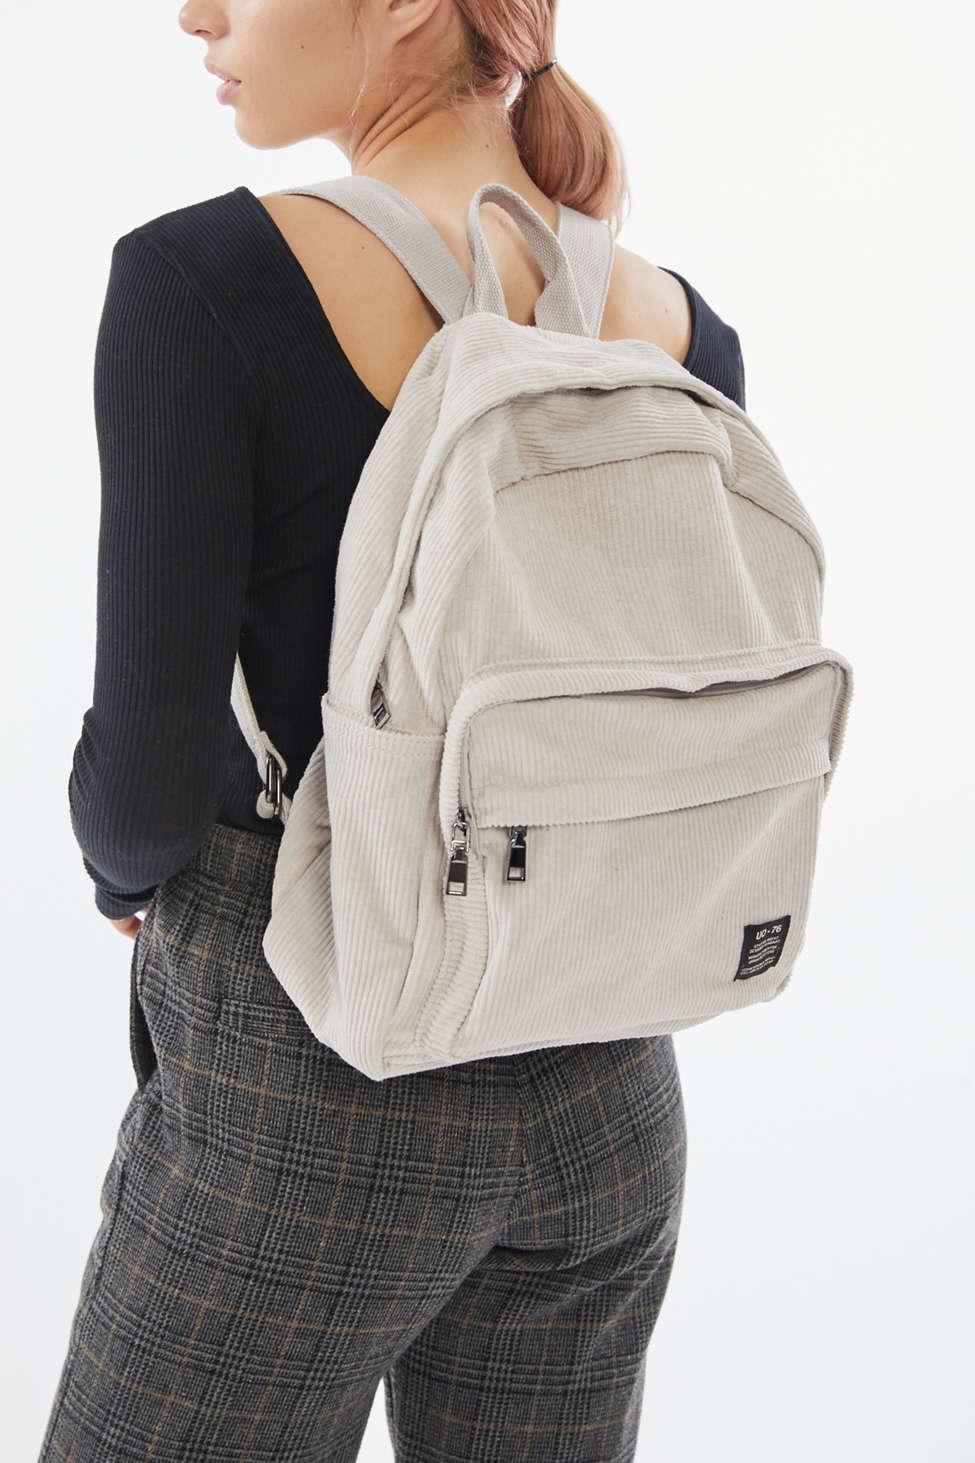 Corduroy Backpack Urban Outfitters Top Sellers, SAVE 50%.